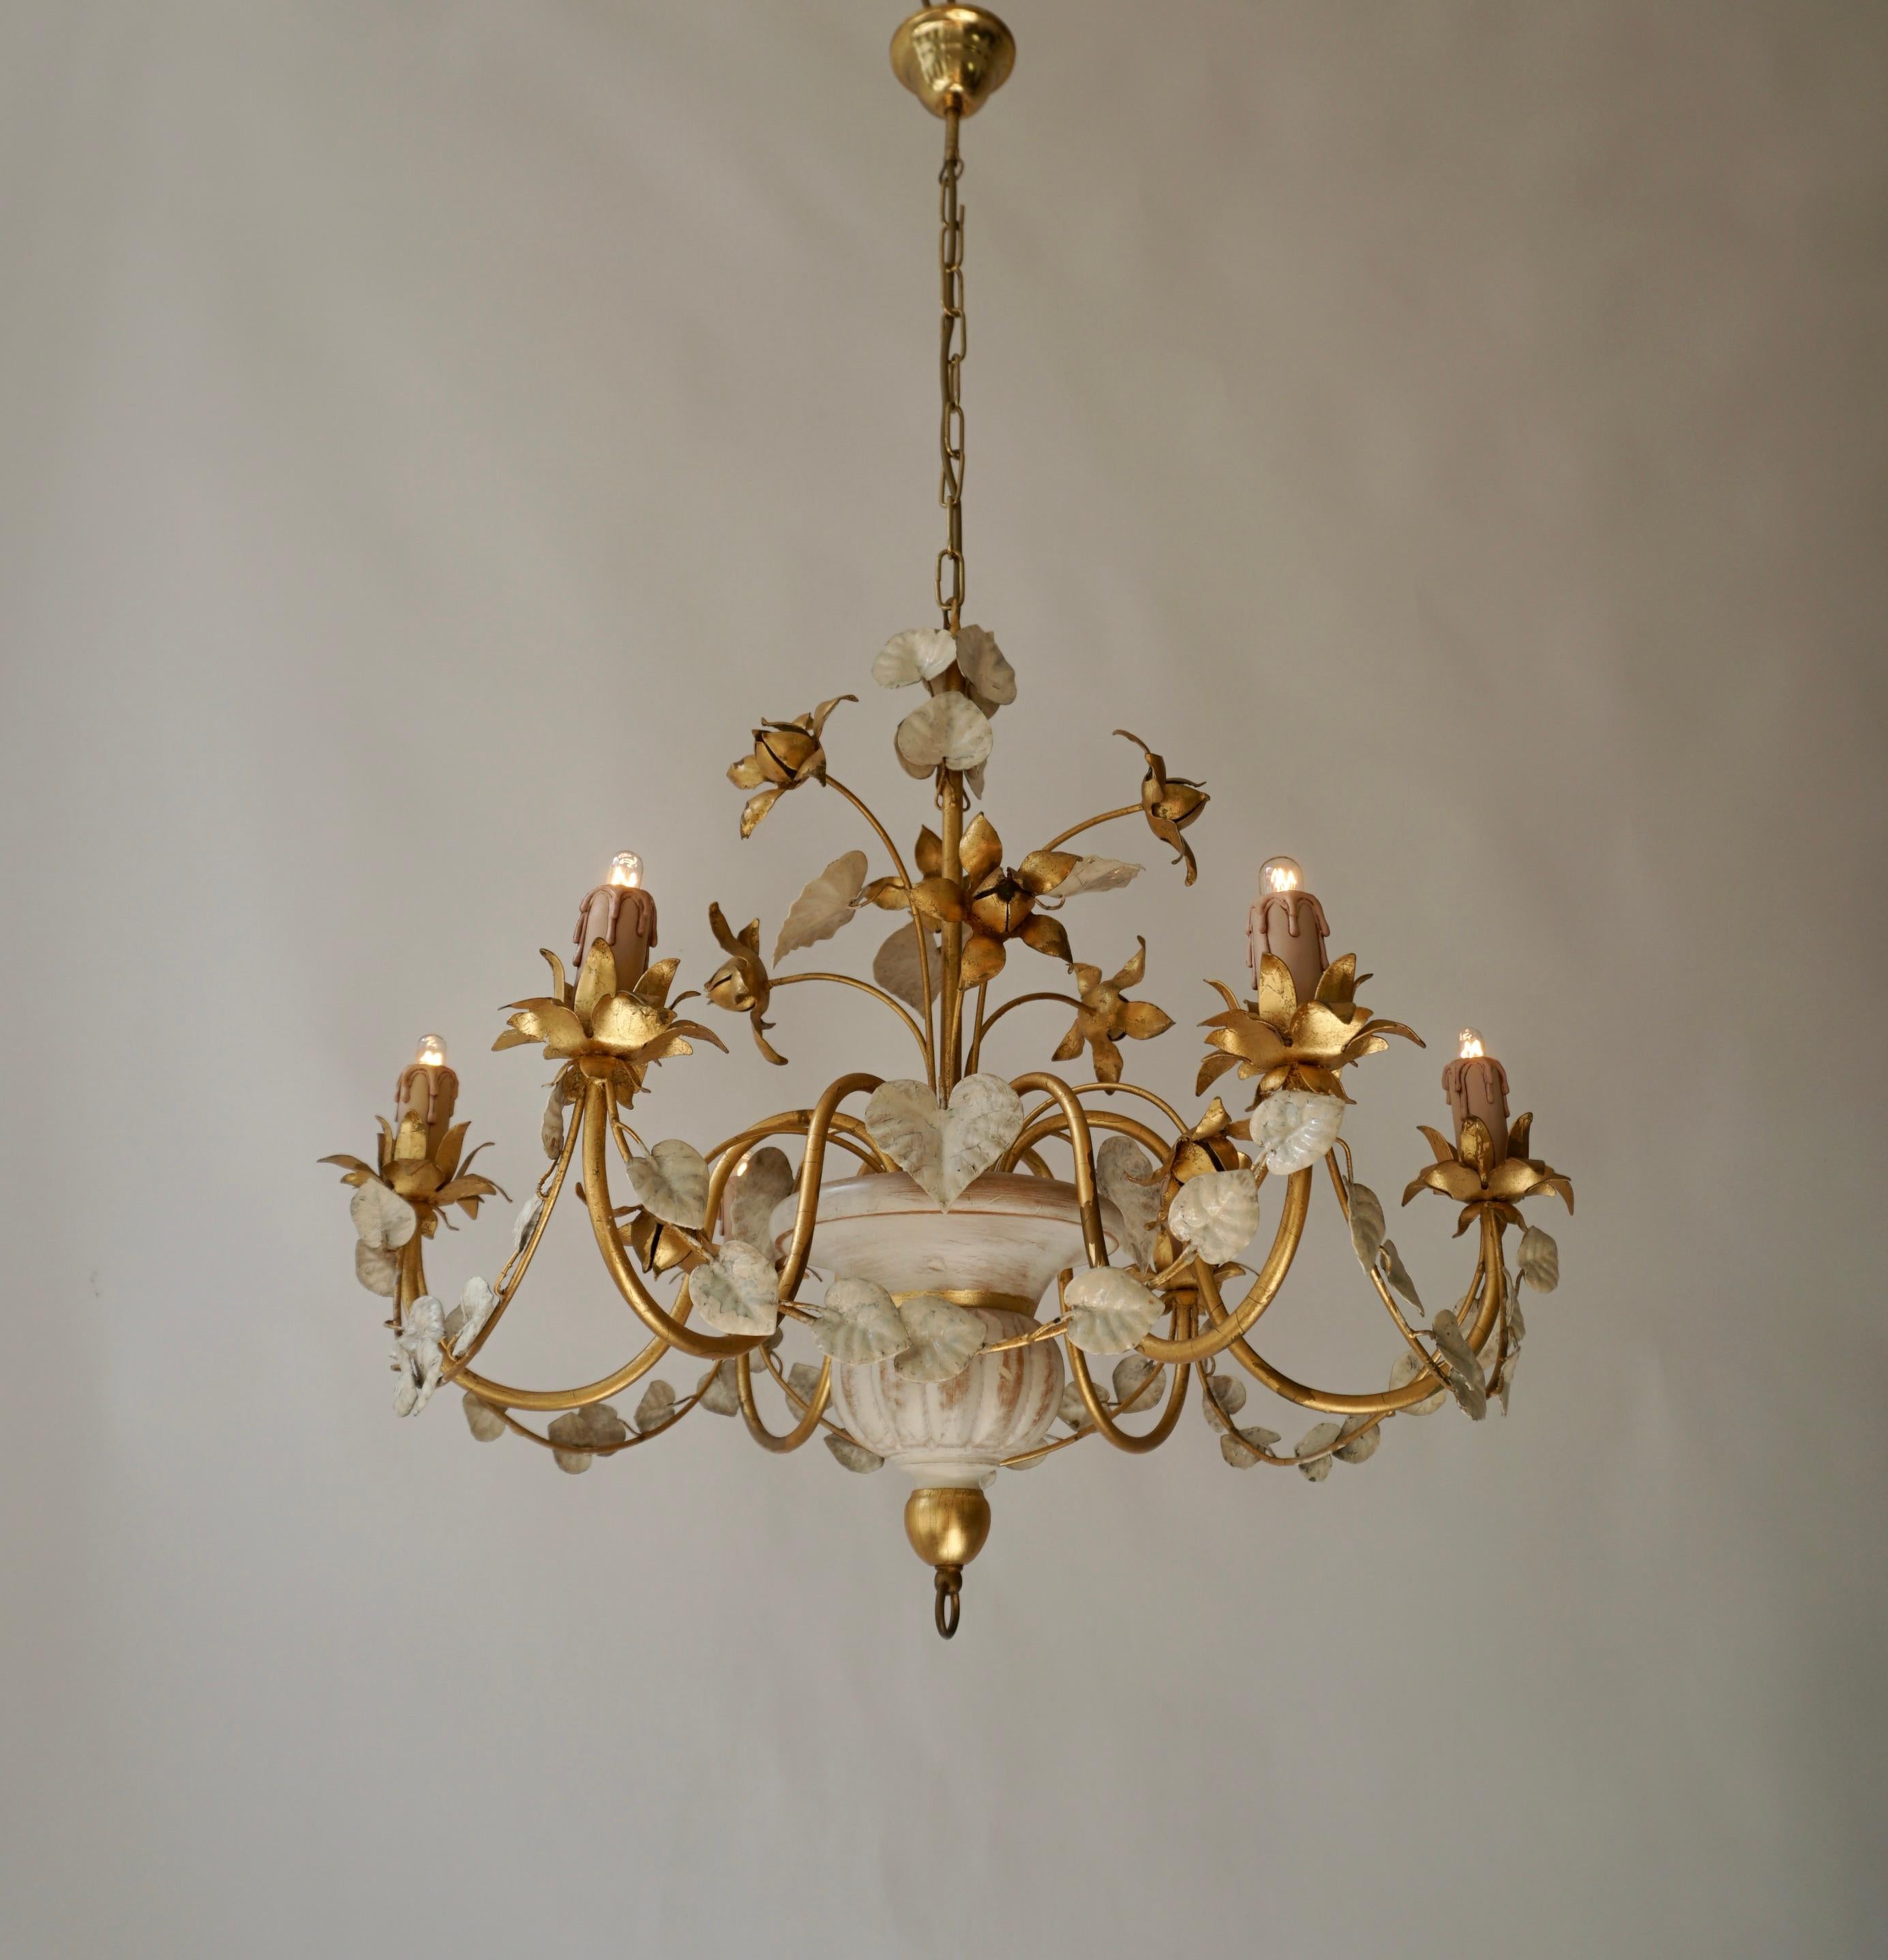 Beautiful golden beige chandelier with gold colored flowers and white leaves.

Diameter 27.1